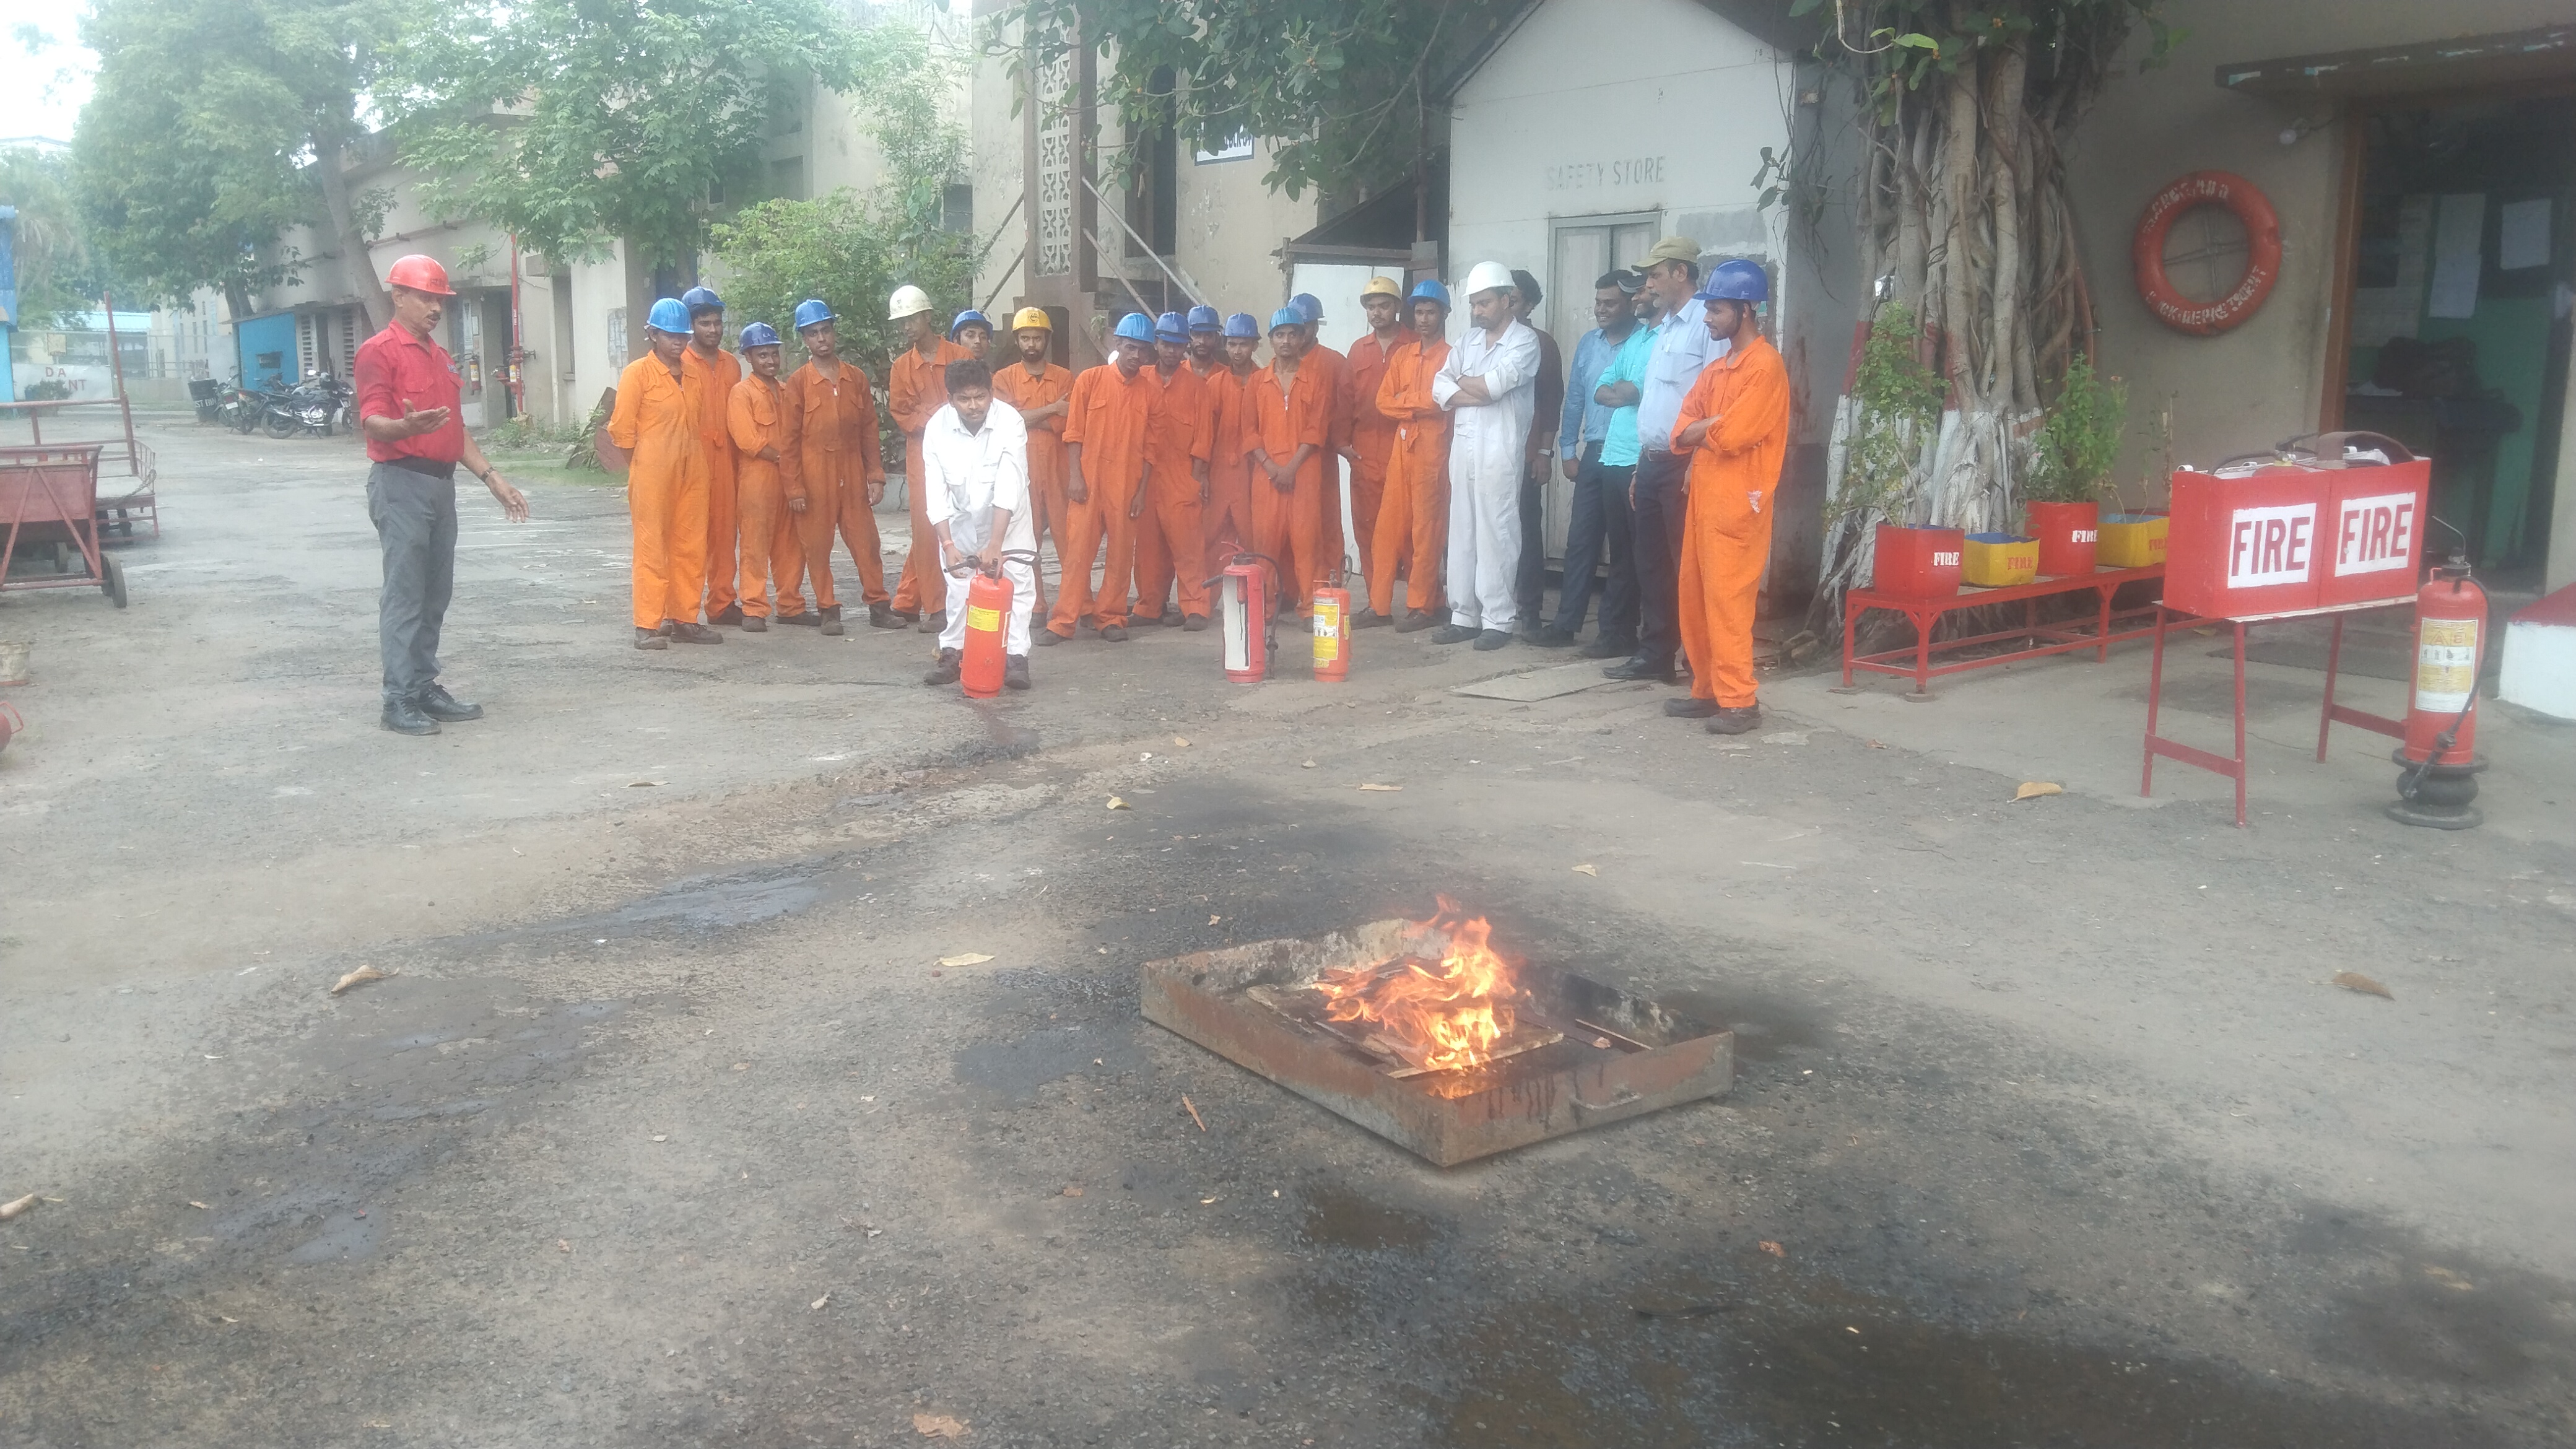 Theoretical & Practical Safety, Fire Fighting & Fire Prevention Training Program on 08 Jun 23